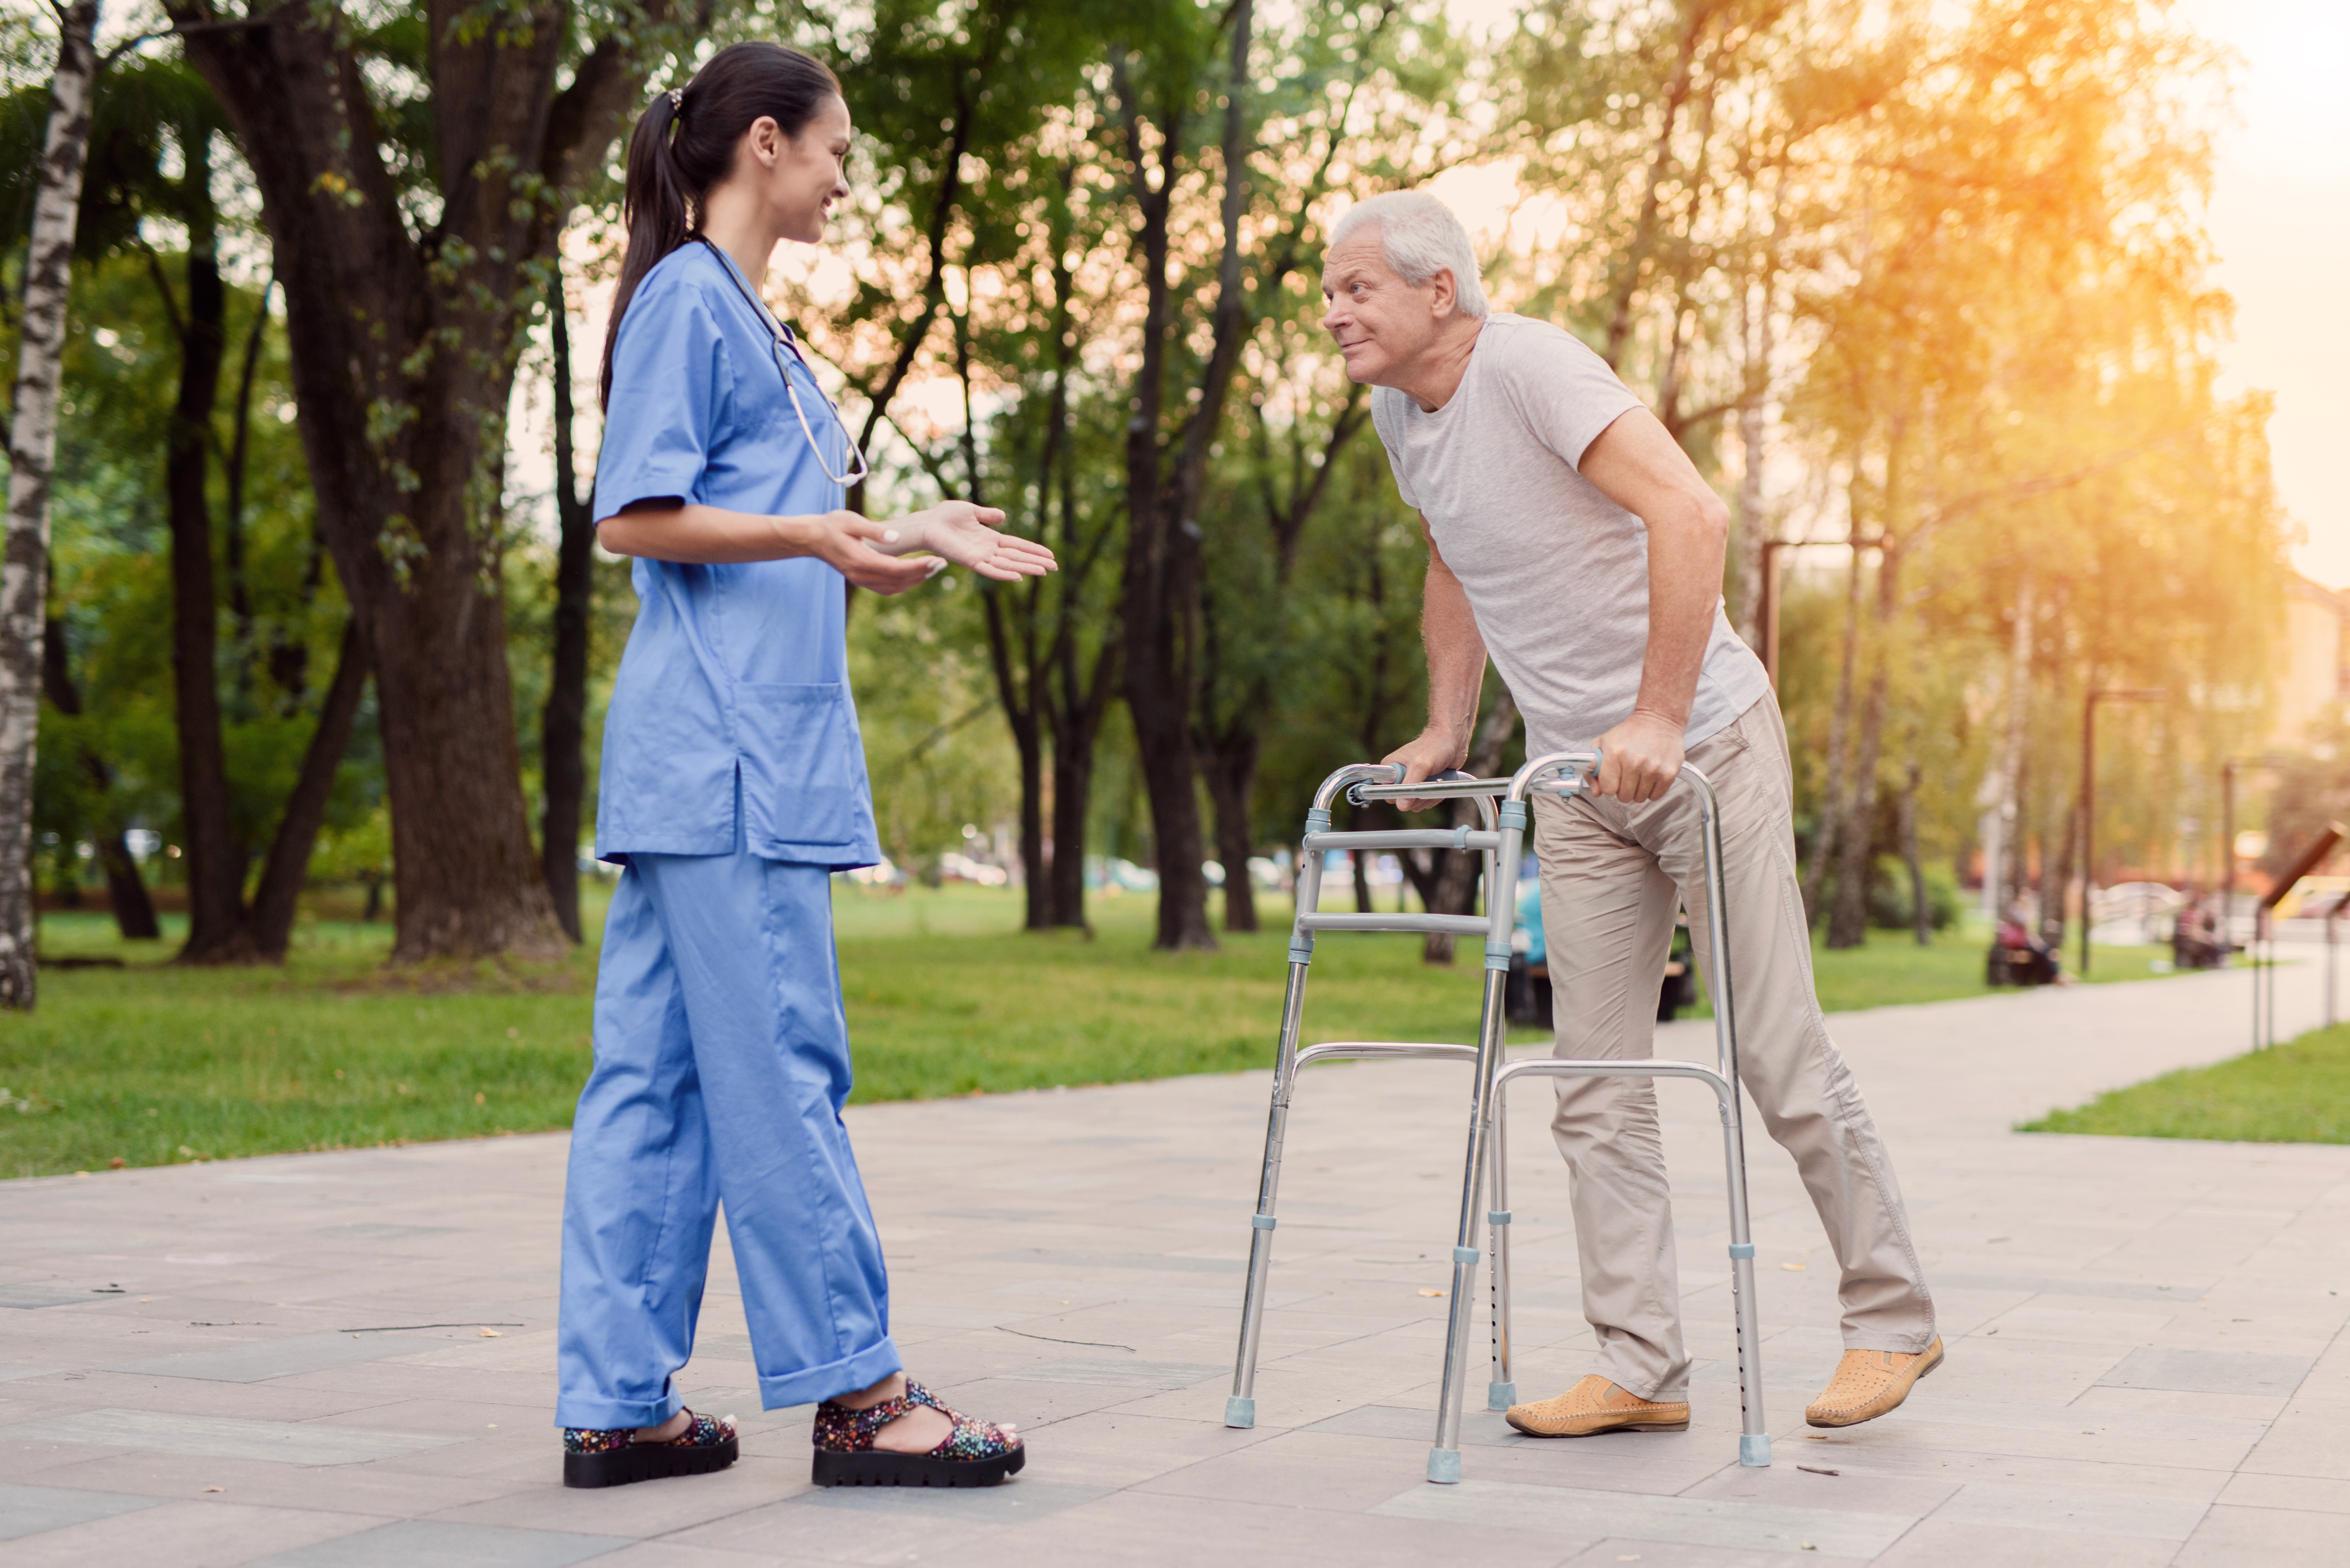 A young nurse is standing in the park, with an elderly man and is helping him walk.